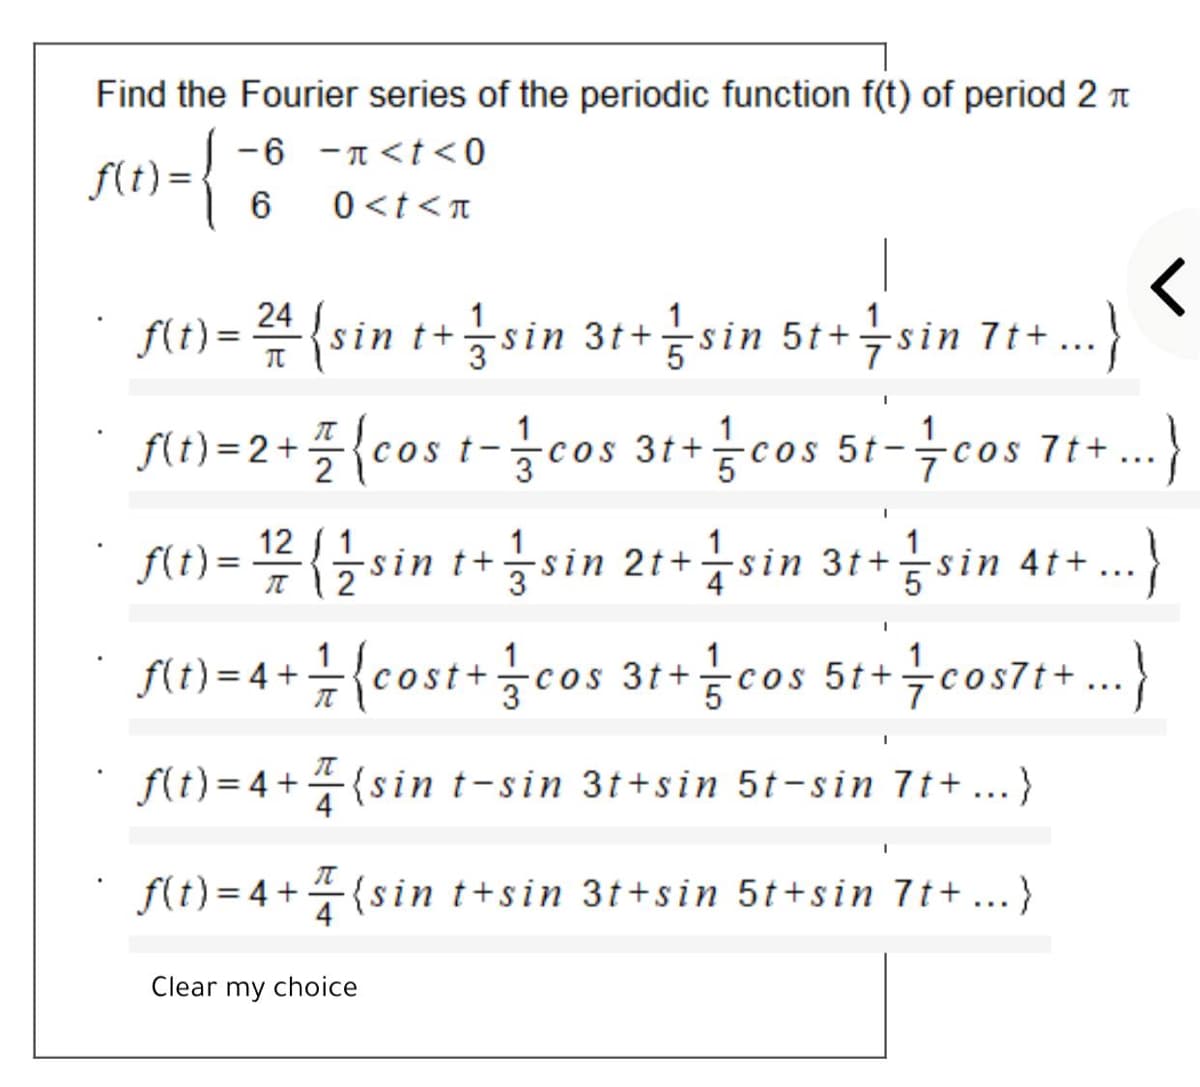 Find the Fourier series of the periodic function f(t) of period 2 T
-6 -T<t <0
f(t) =
0<t<T
f(t)= 4{sin
t+ .)
sin 3t+ sin 5t+sin 7t+
ft)=2+플(cos t-3cos gcos 5t-극cos 71+..
cos 5t-cos 71+
3t+
12 ( 1
f(t) = sin t+
sin 21+sin 3t+sin
in 4t+
nw-4+1(cost+cos 31+금cos 51+ 늑co371*)
COS
f(t)= 4+(sin t-sin 3t+sin 5t-sin 7t+ ...}
4
f(t) = 4 +{sin t+sin 3t+sin 5t+sin 7t + ...}
Clear my choice
